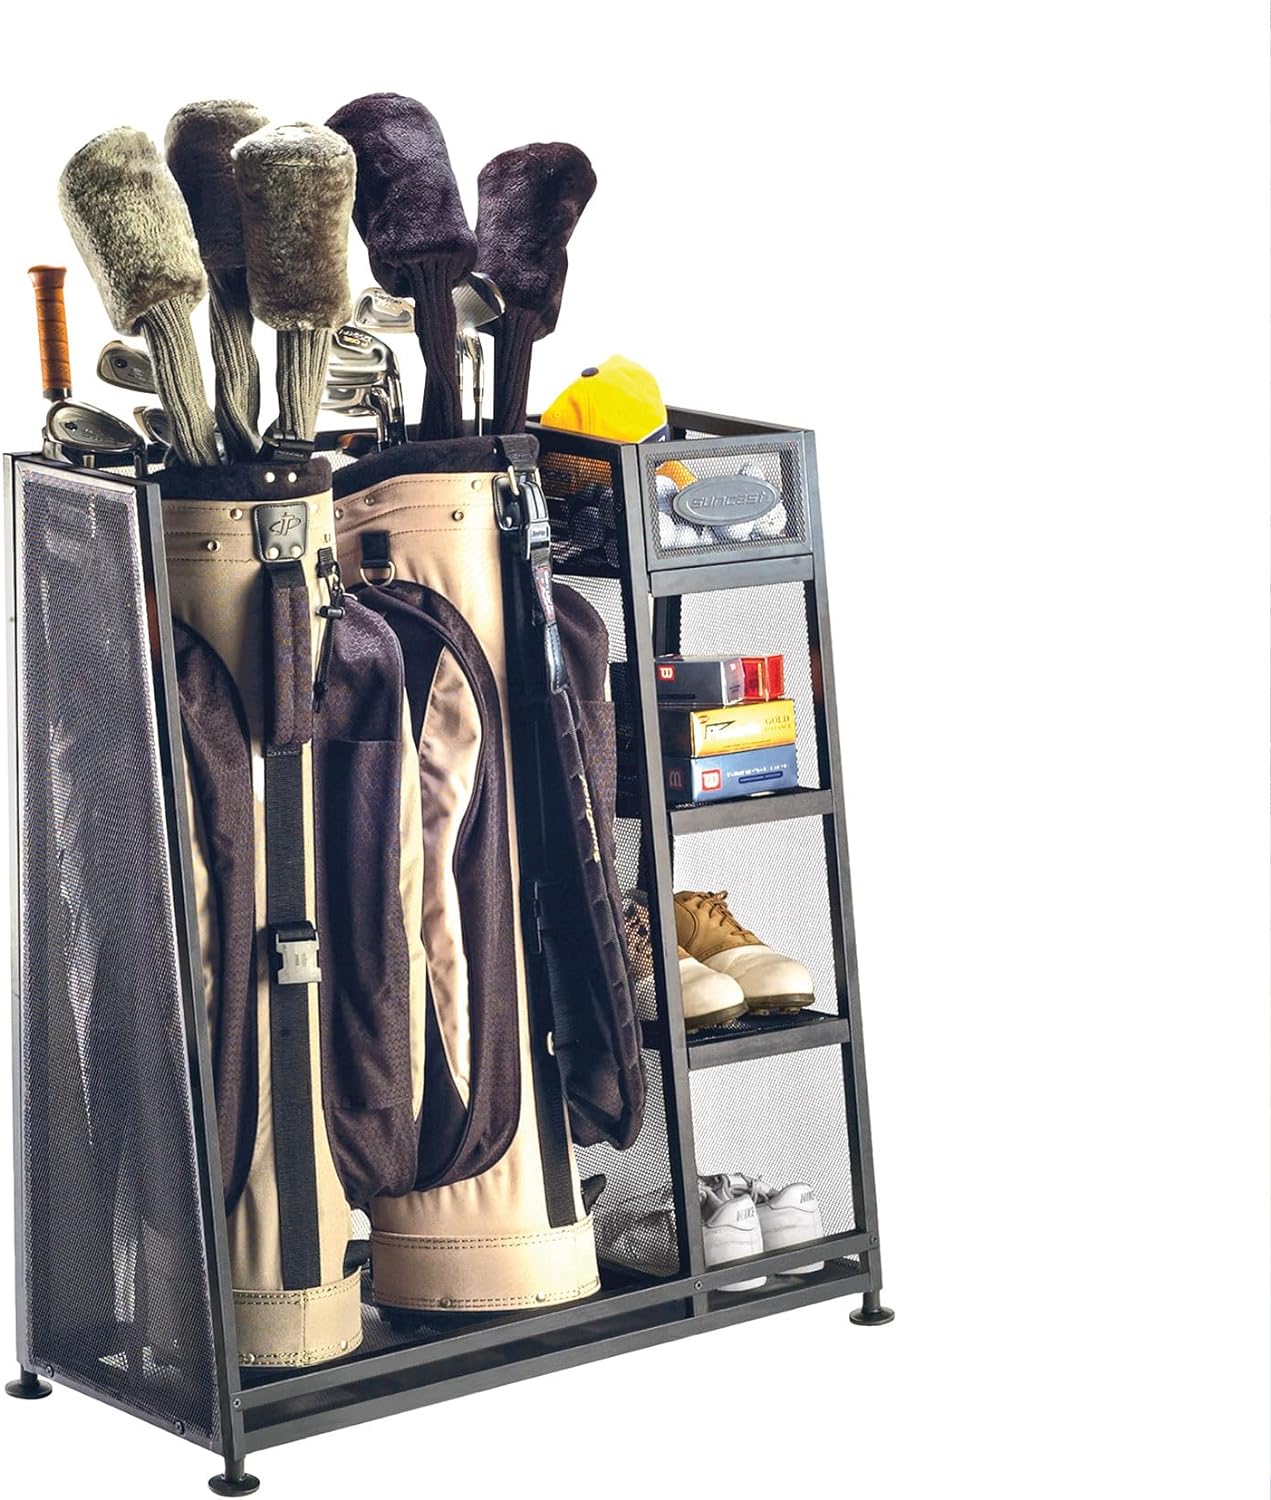 Metal golf equipment storage rack for golf bags, clubs and accessories